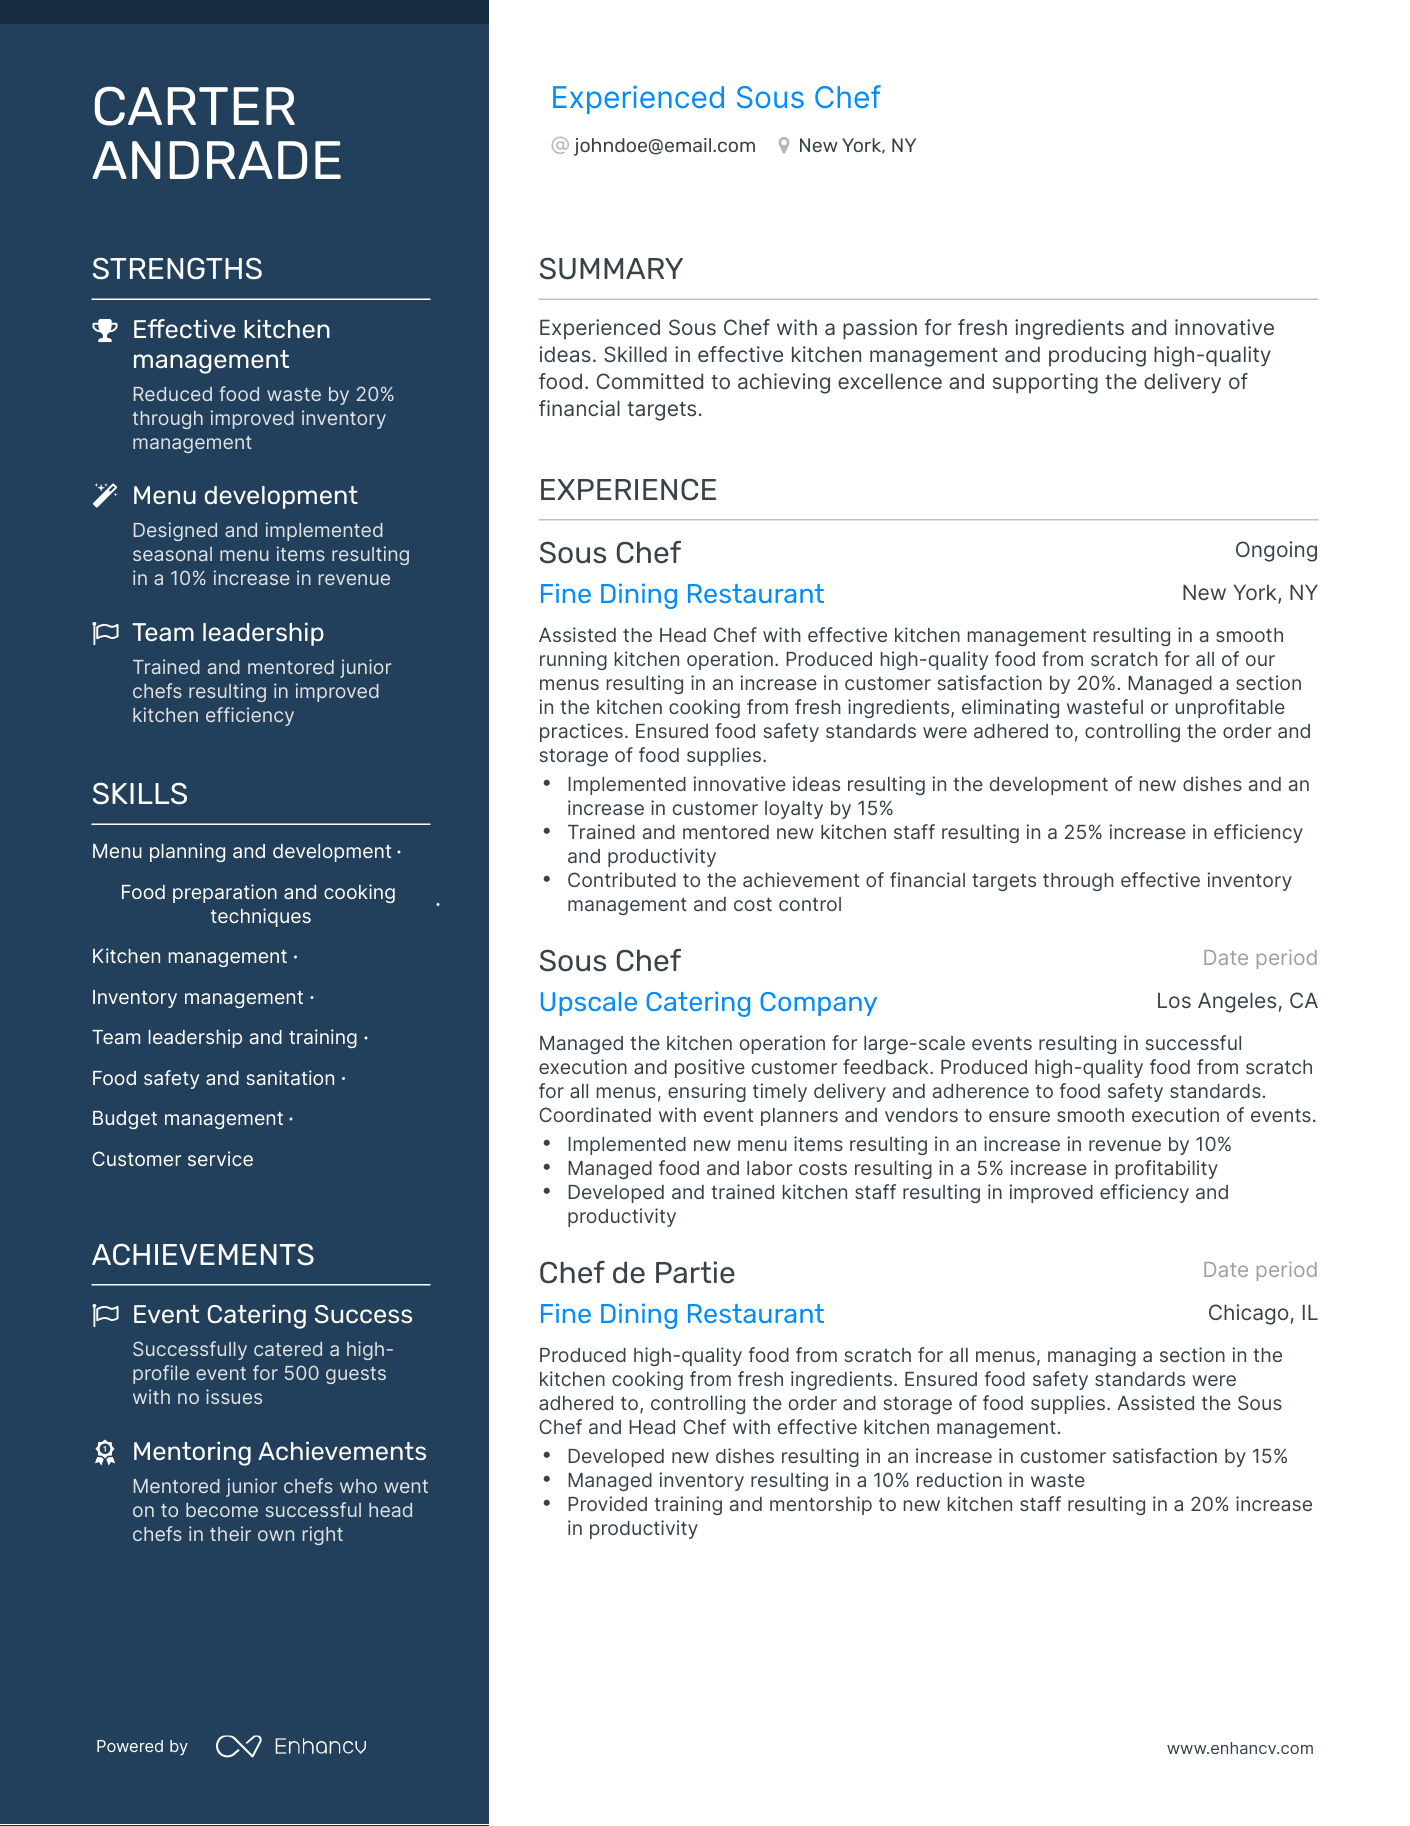 Polished Sous Chef Resume Template